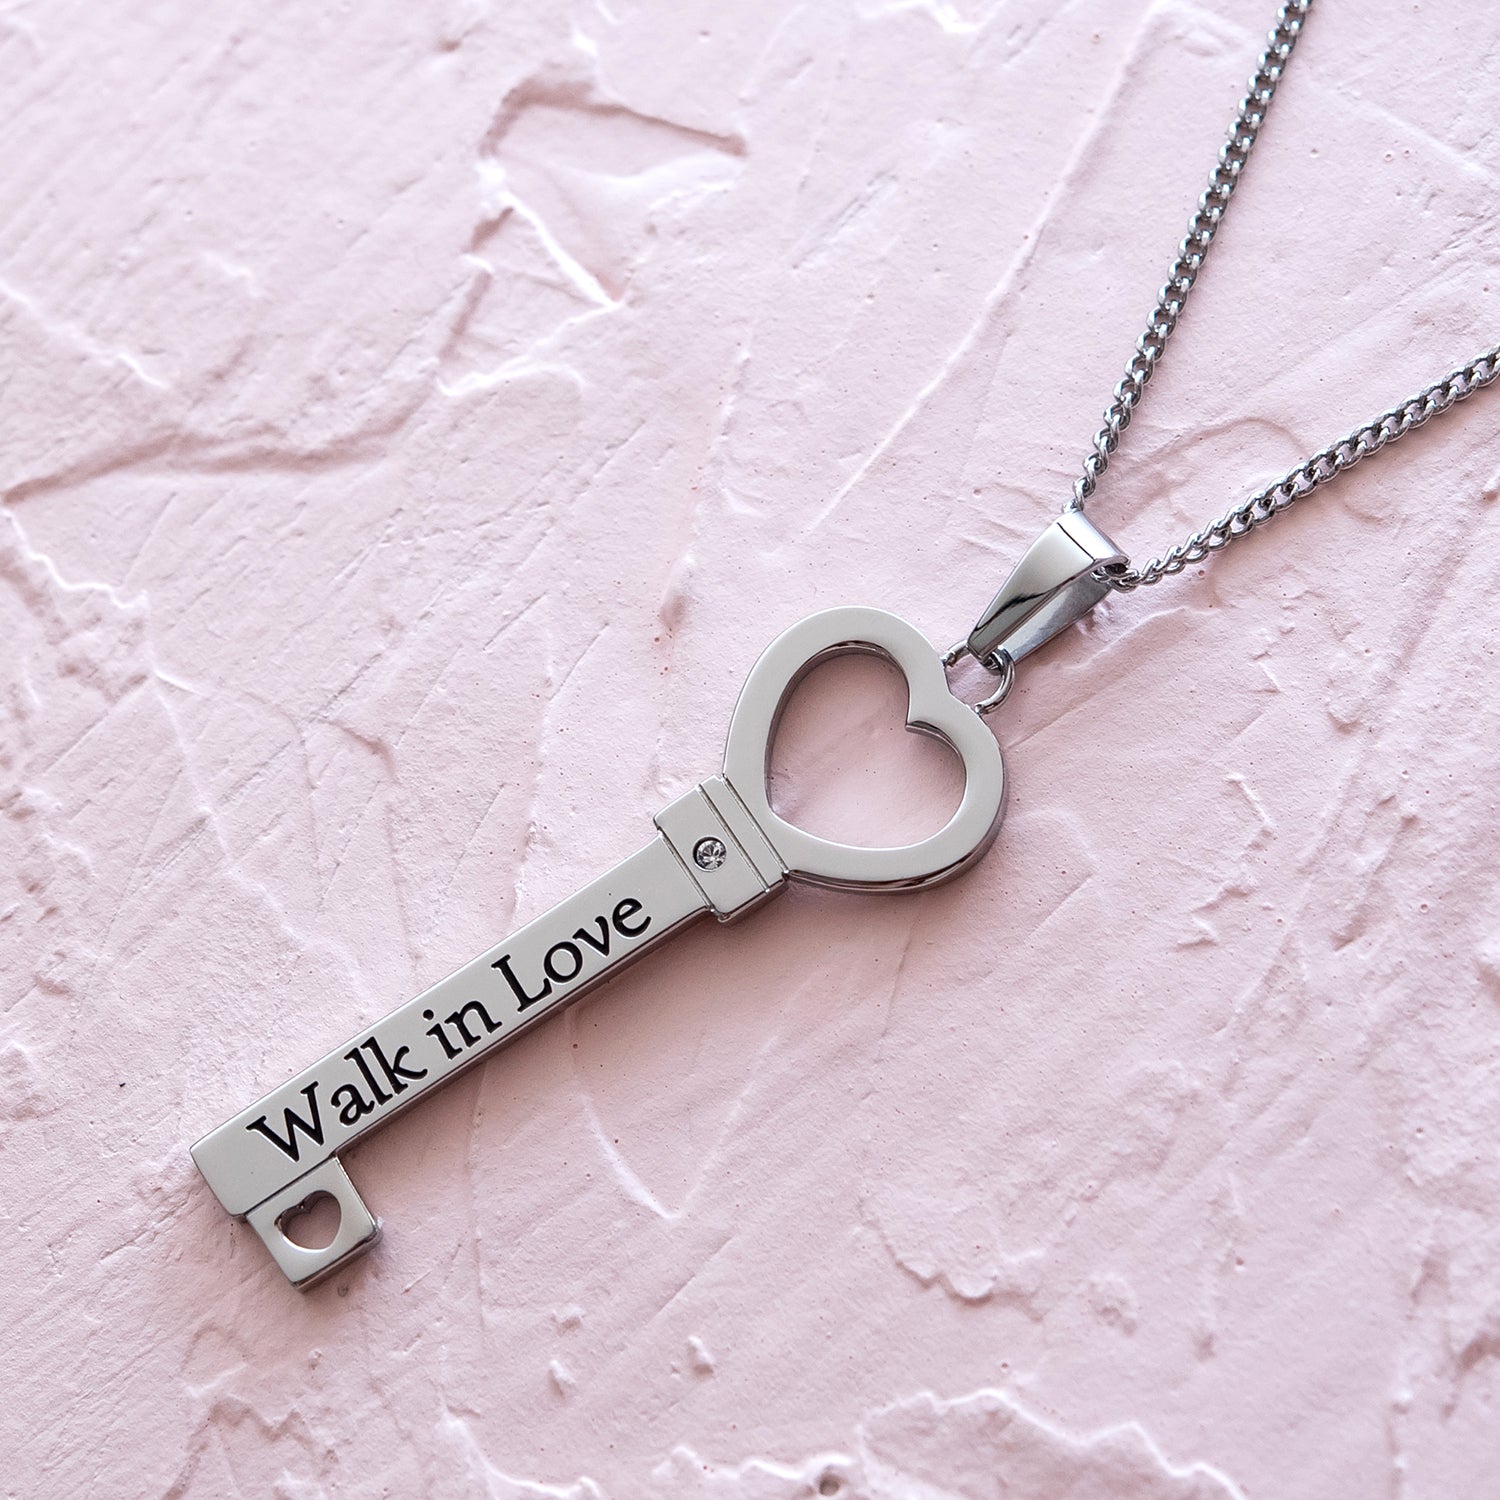 Walk In Love Inspirational Key Pendant Necklace with Cubic Zirconia in Steel